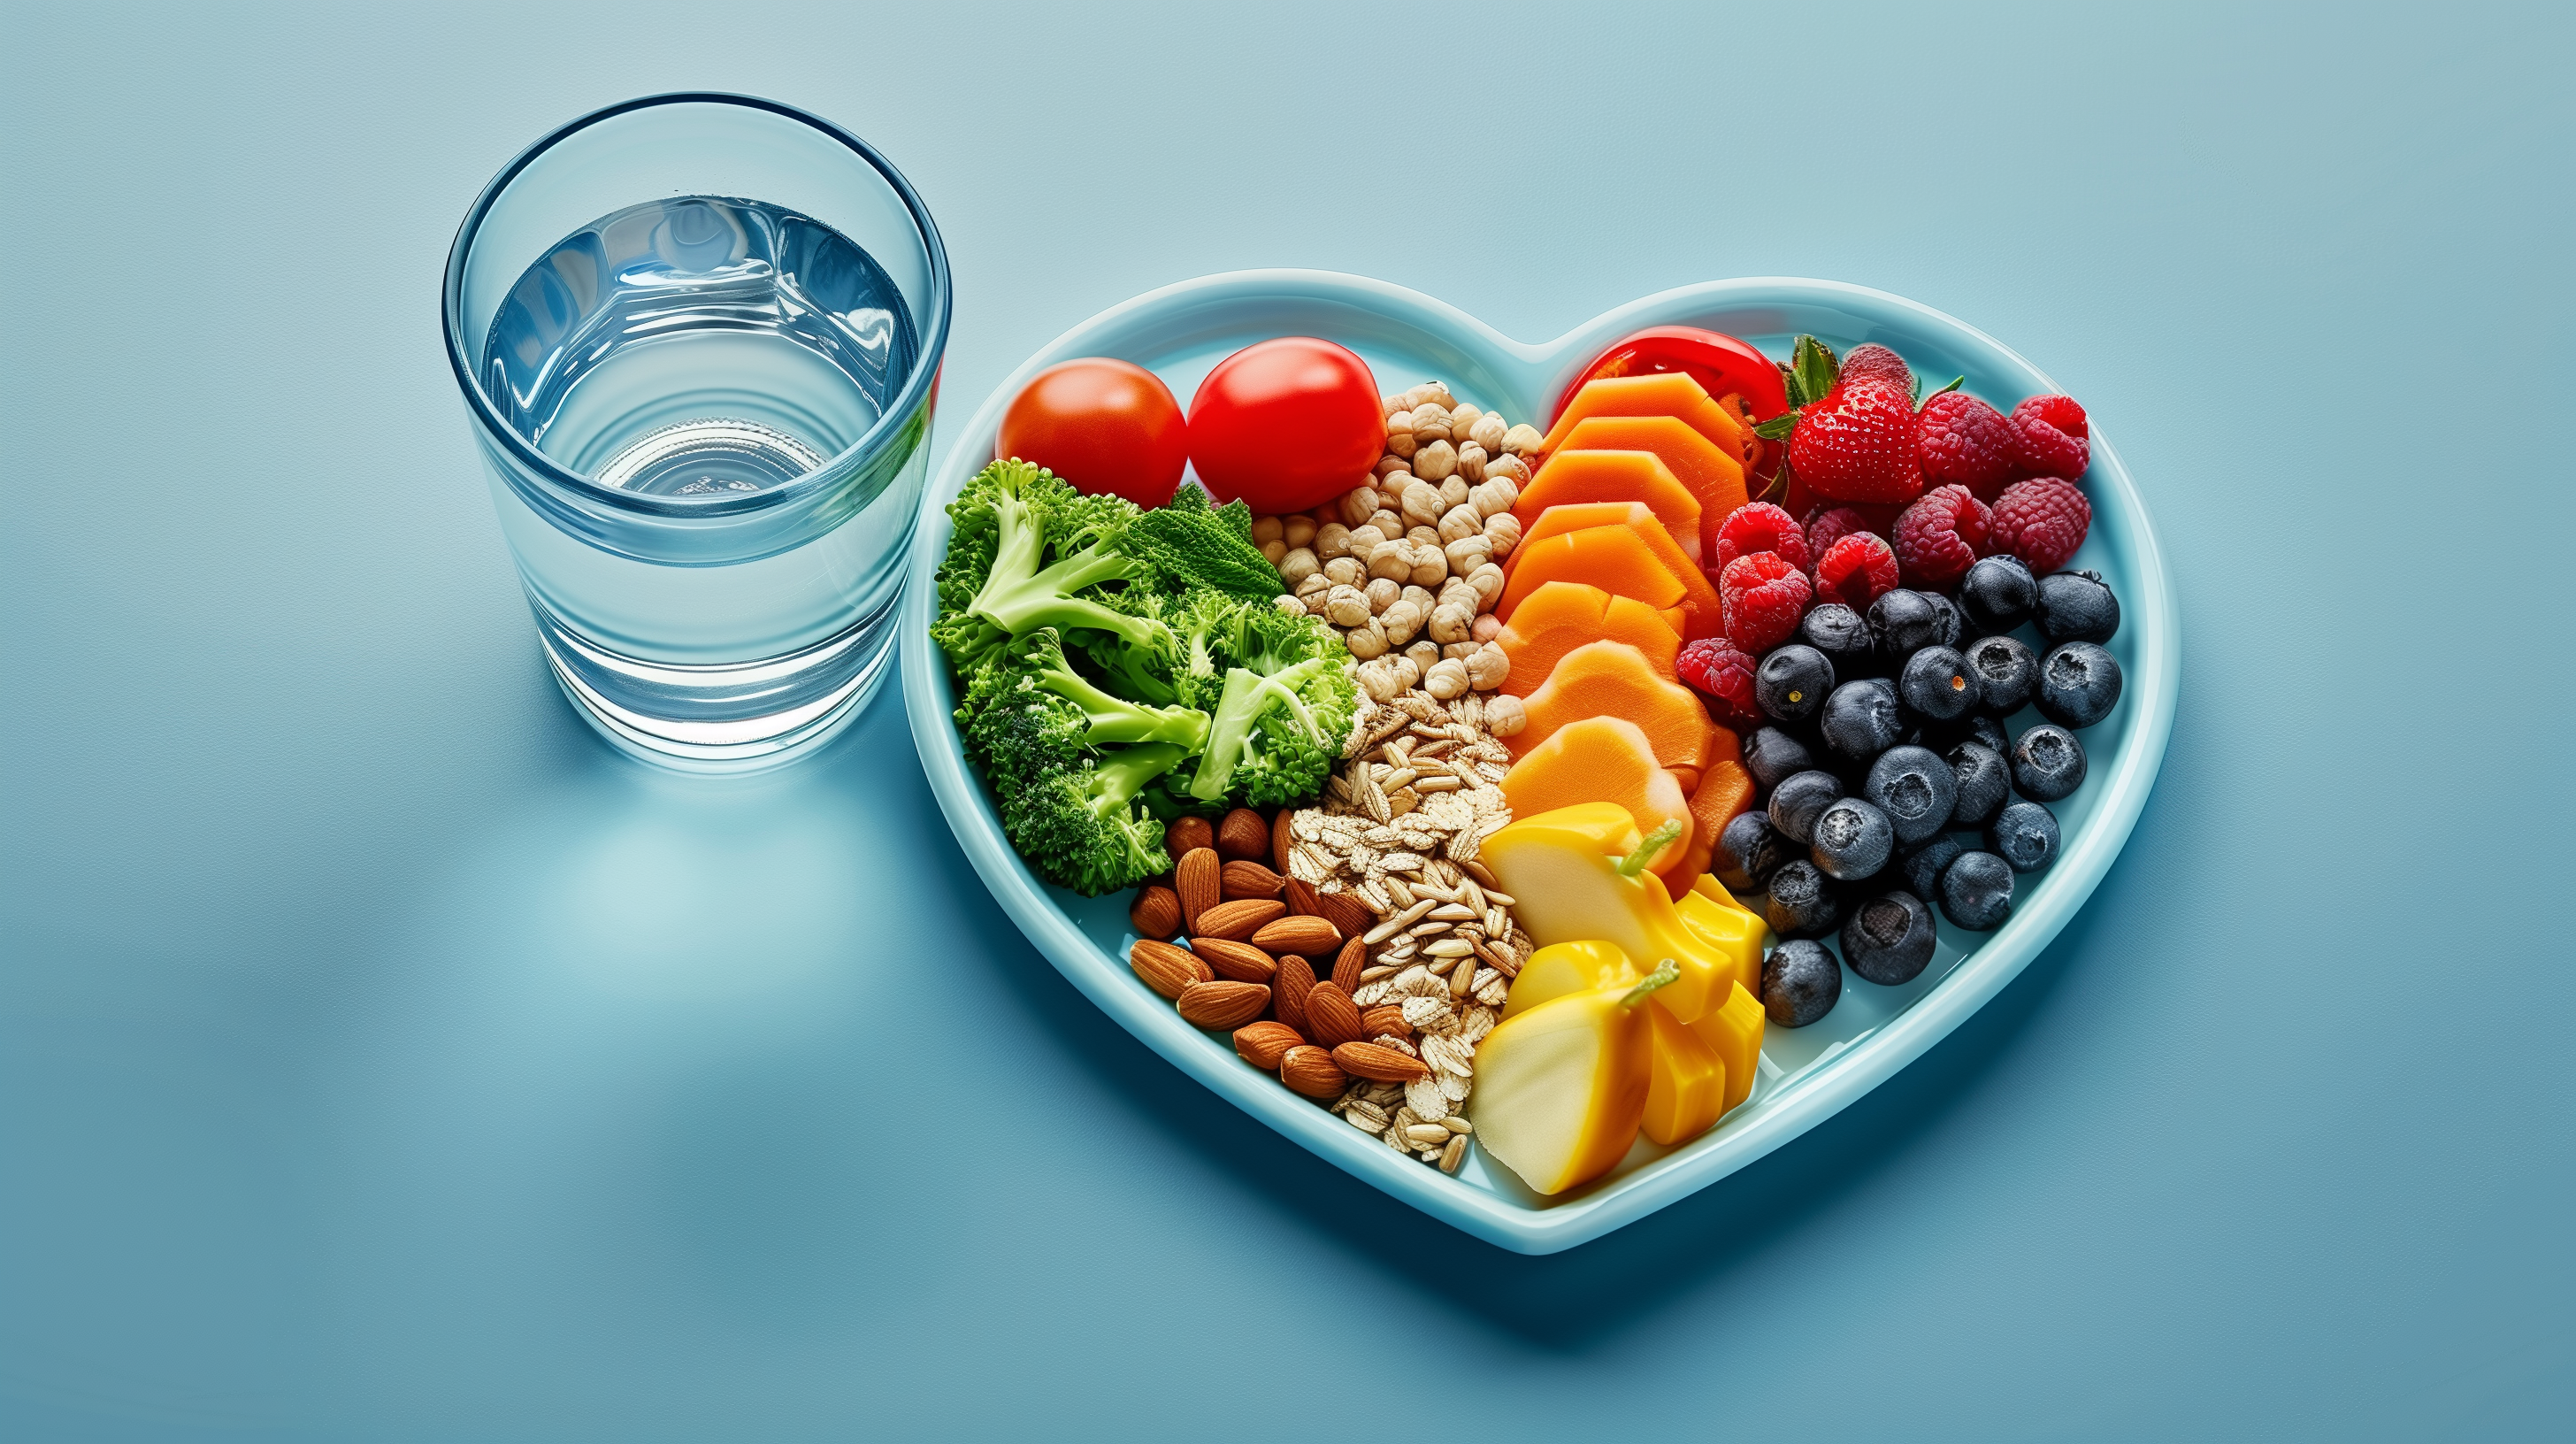 heart-shaped plate filled with vibrant fruits, vegetables, nuts, and whole grains, with a clear, refreshing glass of water